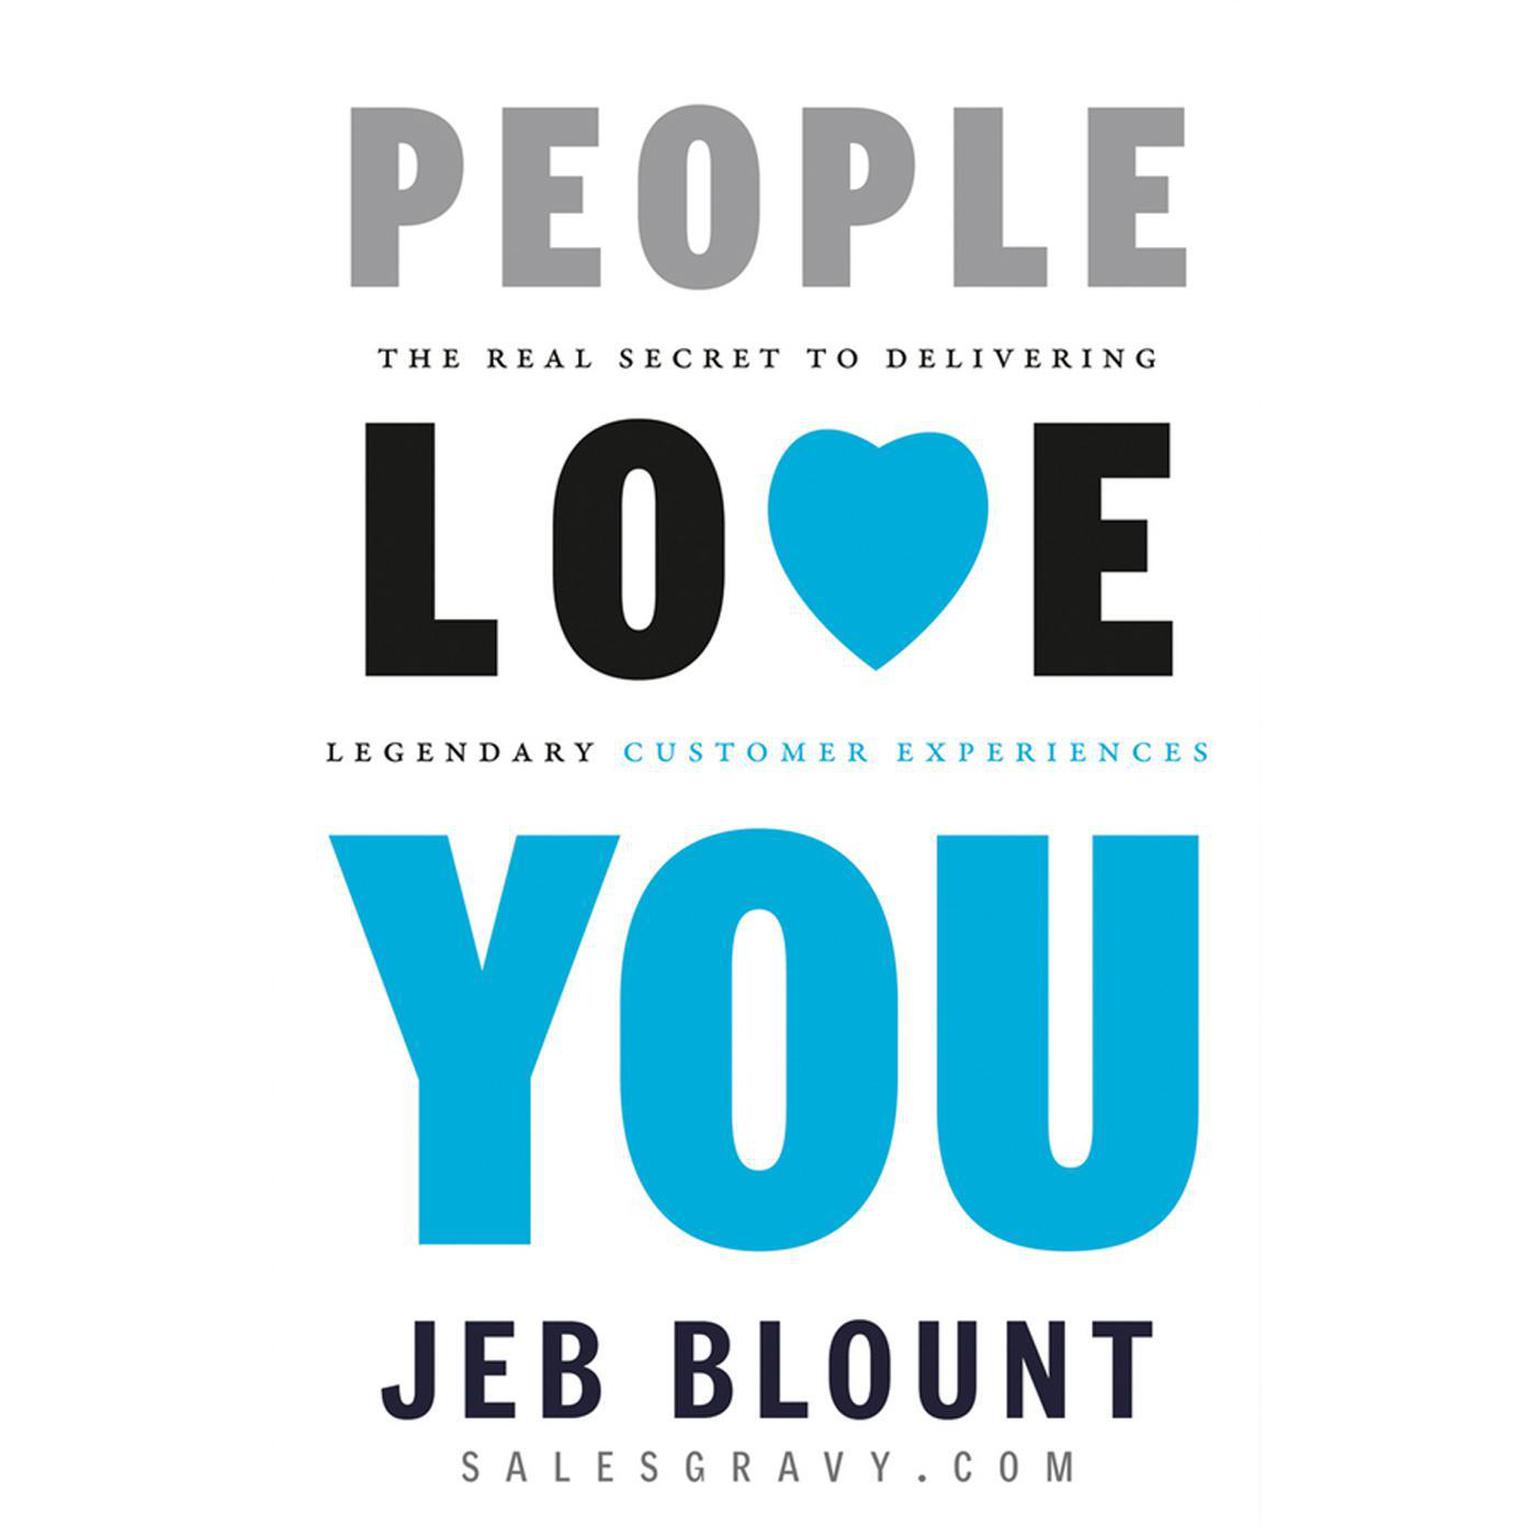 People Love You: The Real Secret to Delivering Legendary Customer Experiences Audiobook, by Jeb Blount